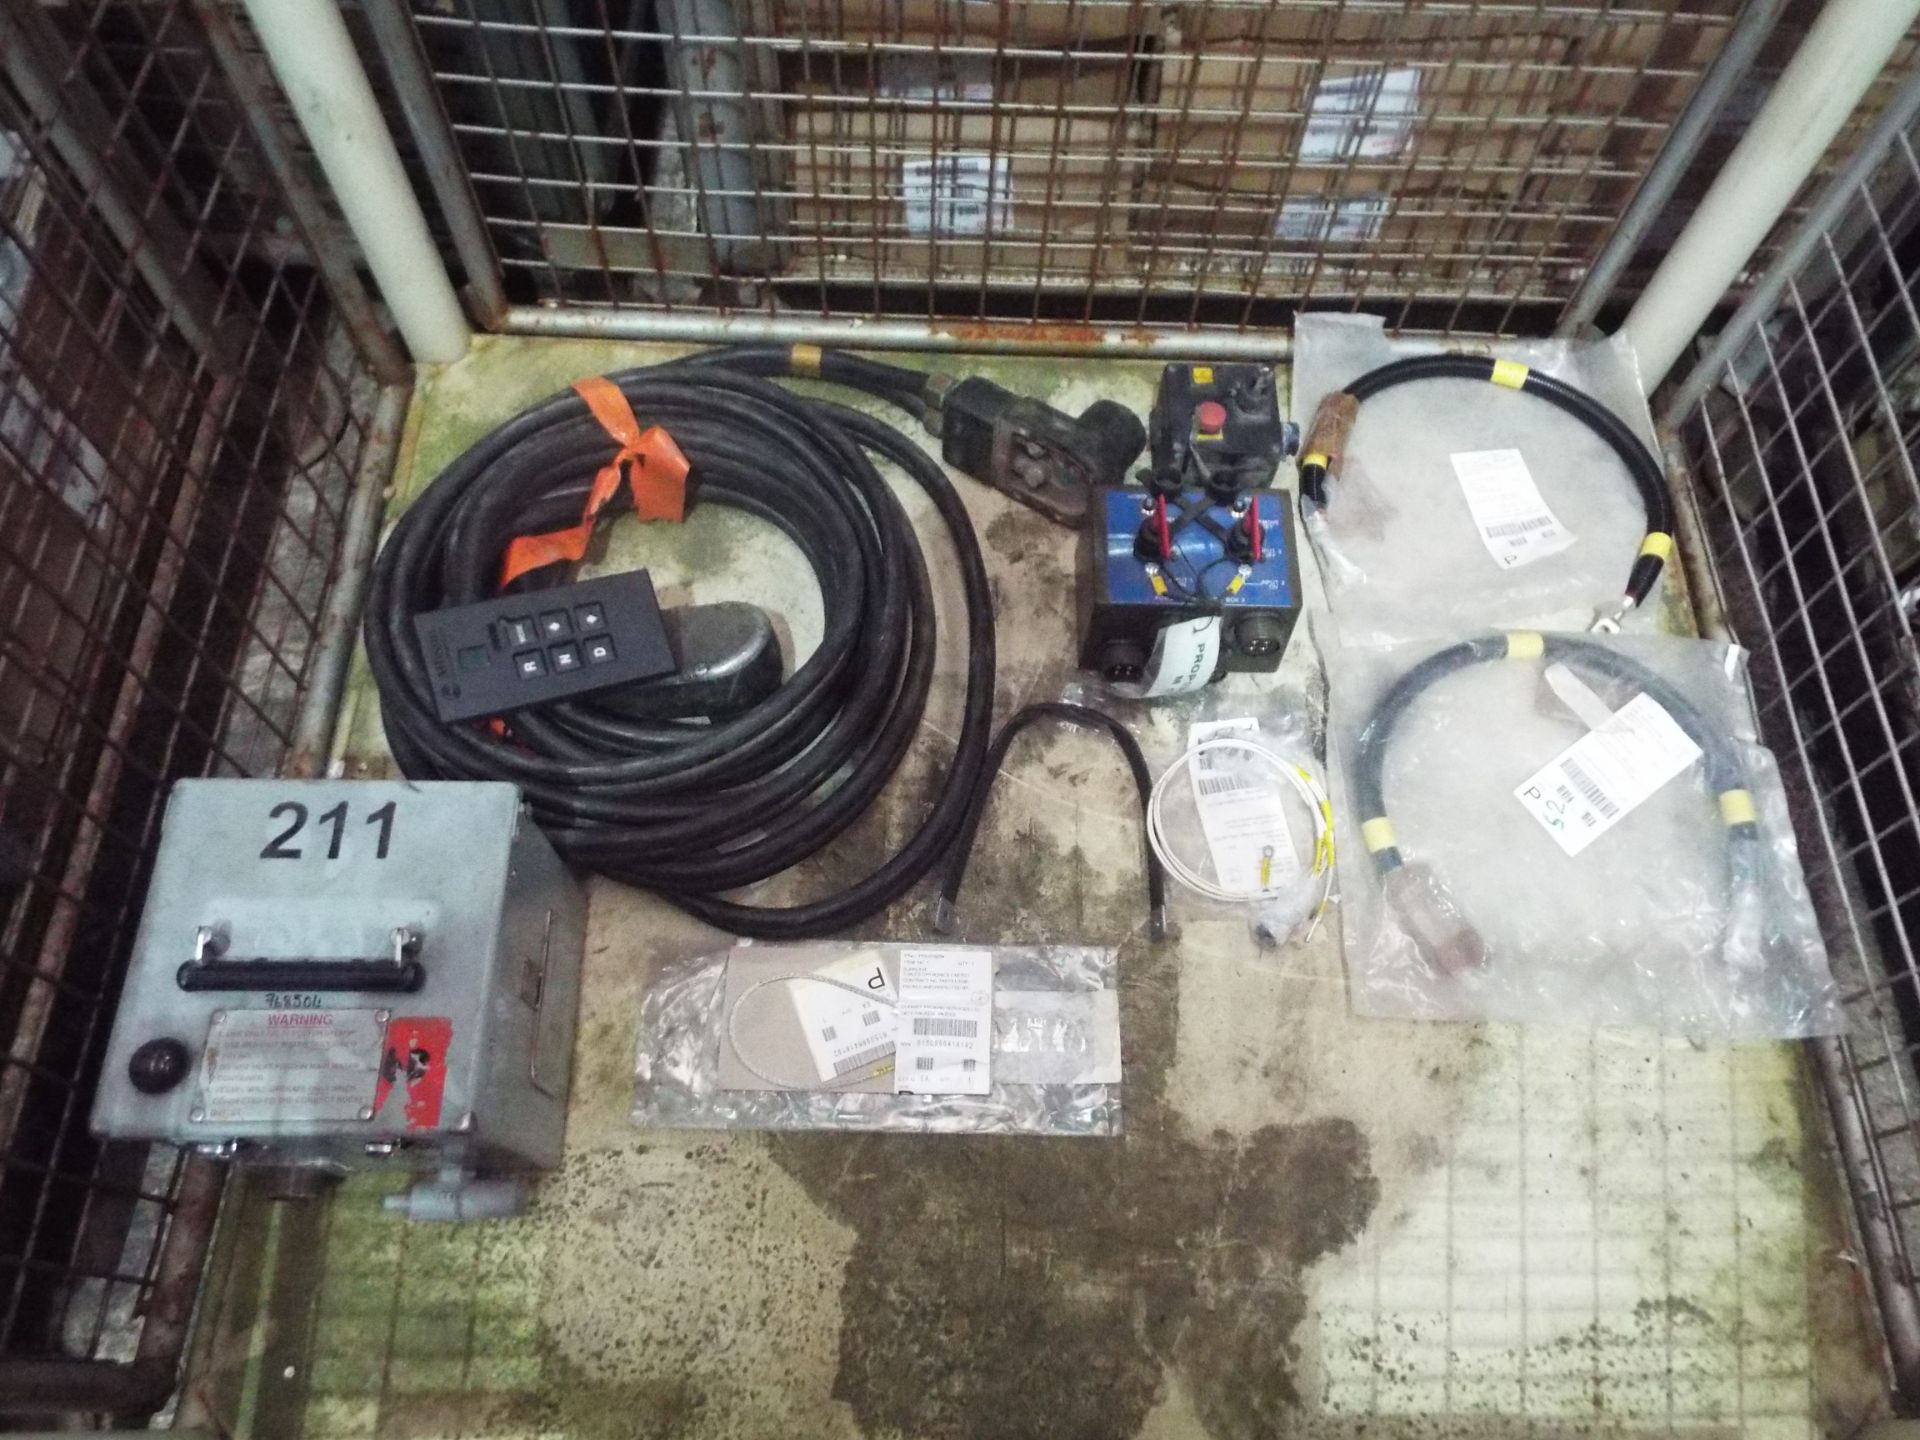 Mixed Stillage of Electrical Equipment